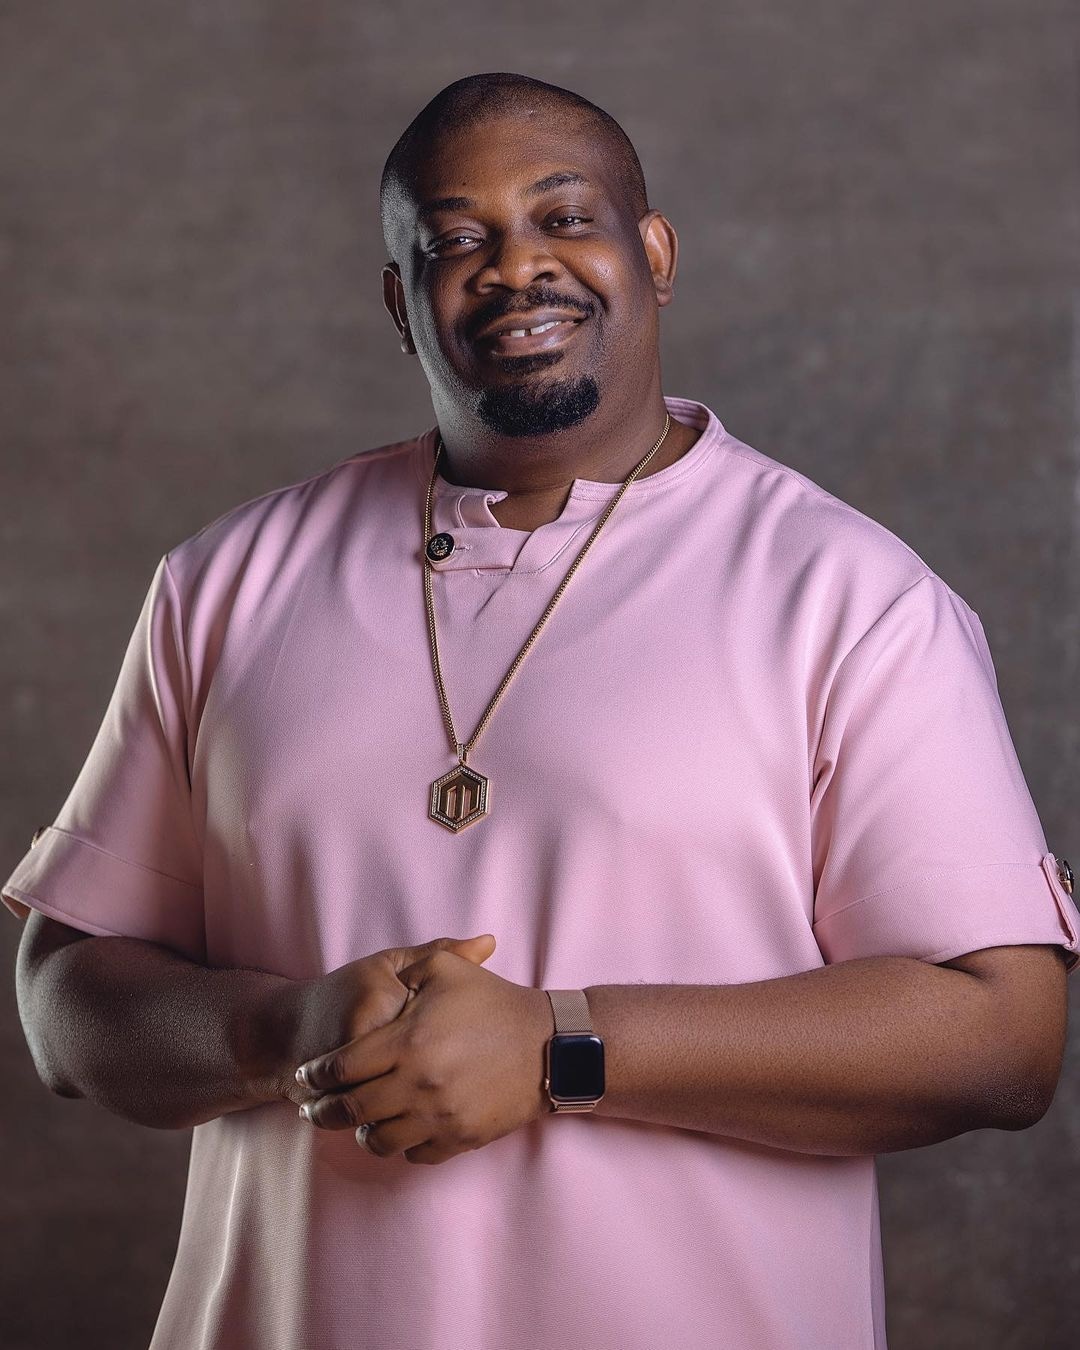 Nigerian Lady Claims Don Jazzy Is Her Destined Husband, She Is Preserving Her Virginity For Him